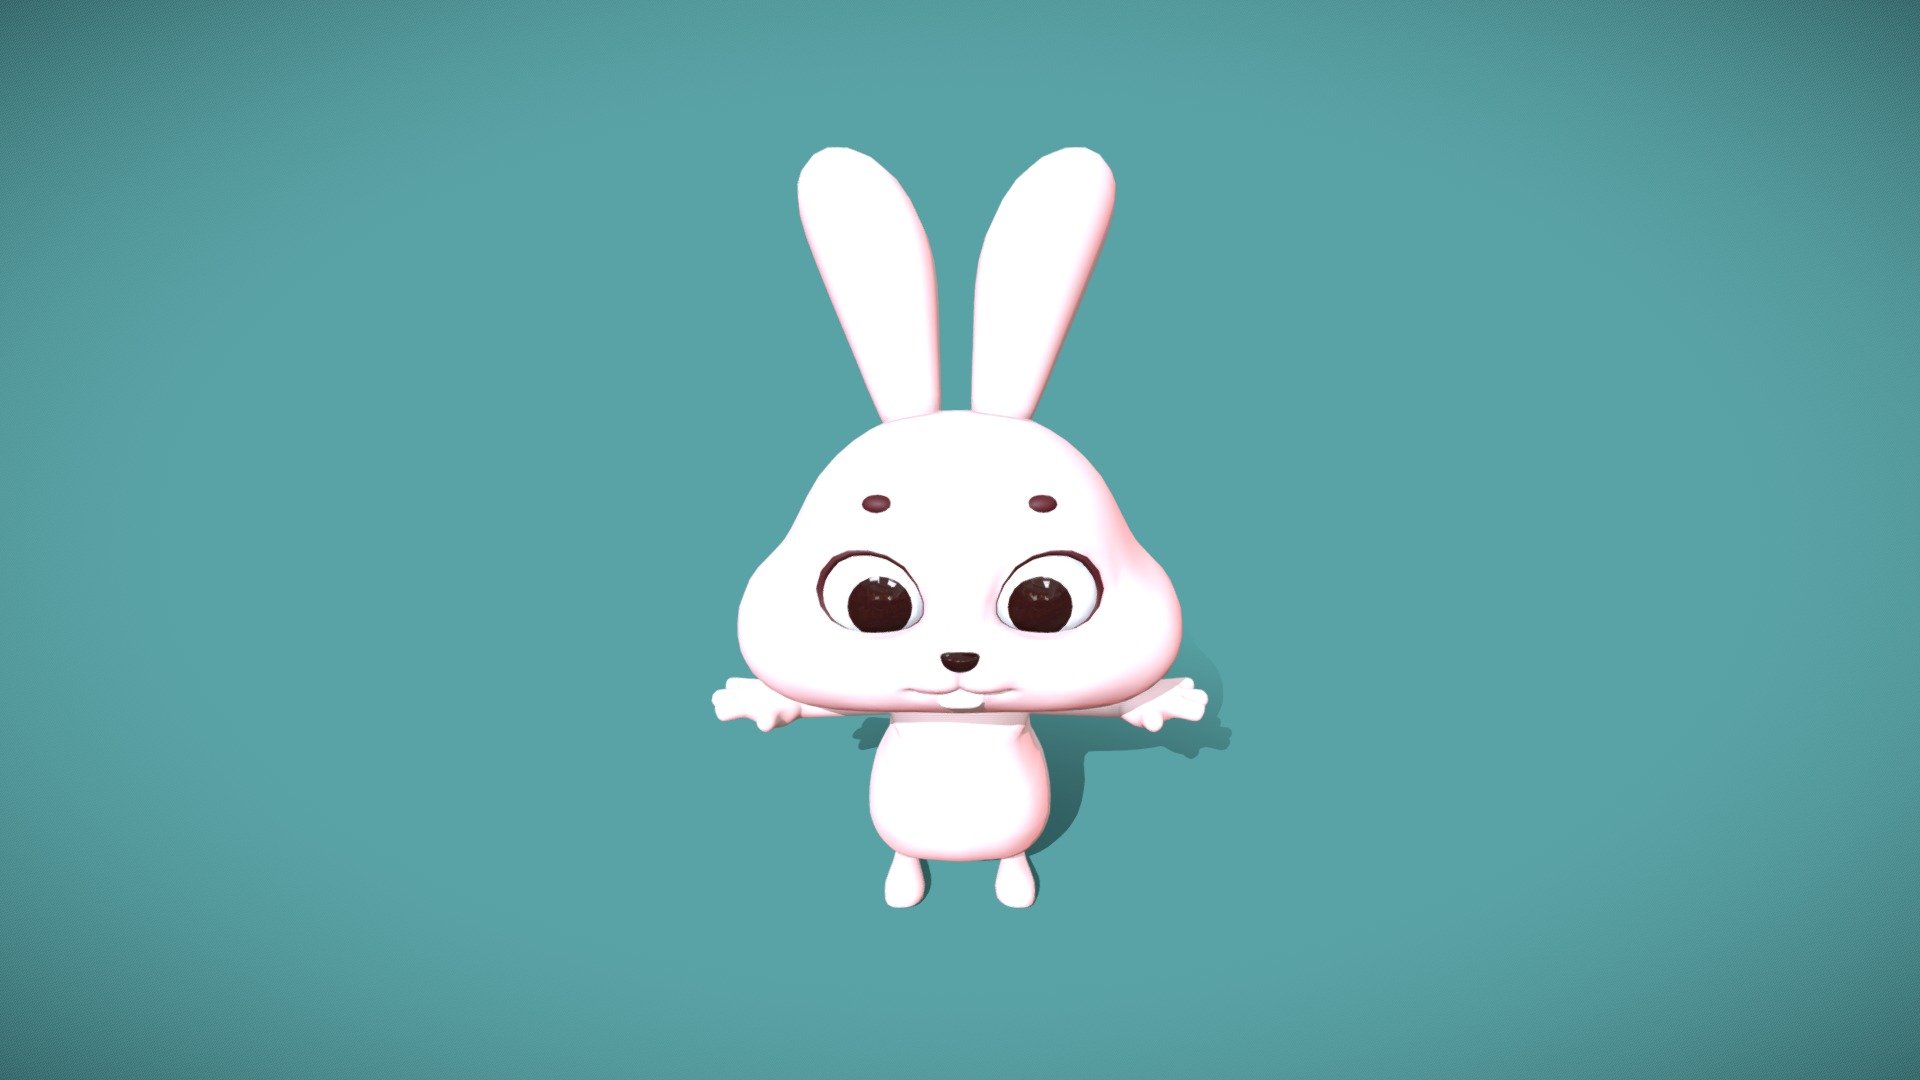 anxi_the_rabbit - 3D model by tinypoint73 [c470add] - Sketchfab